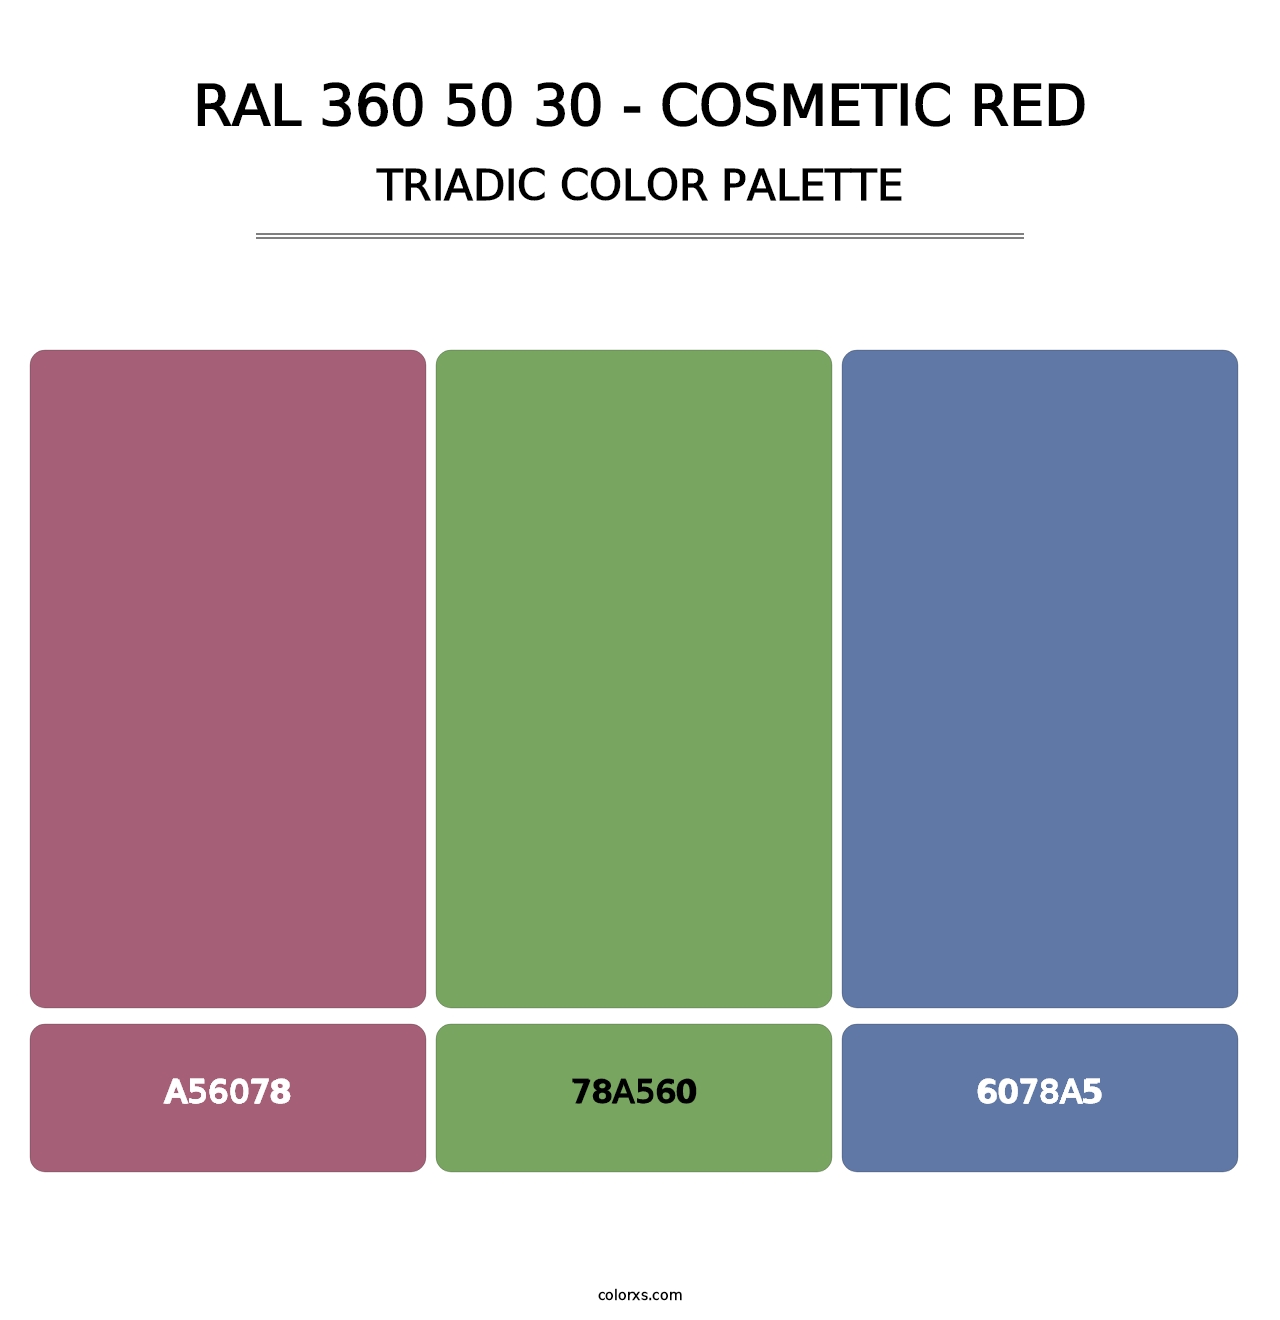 RAL 360 50 30 - Cosmetic Red - Triadic Color Palette